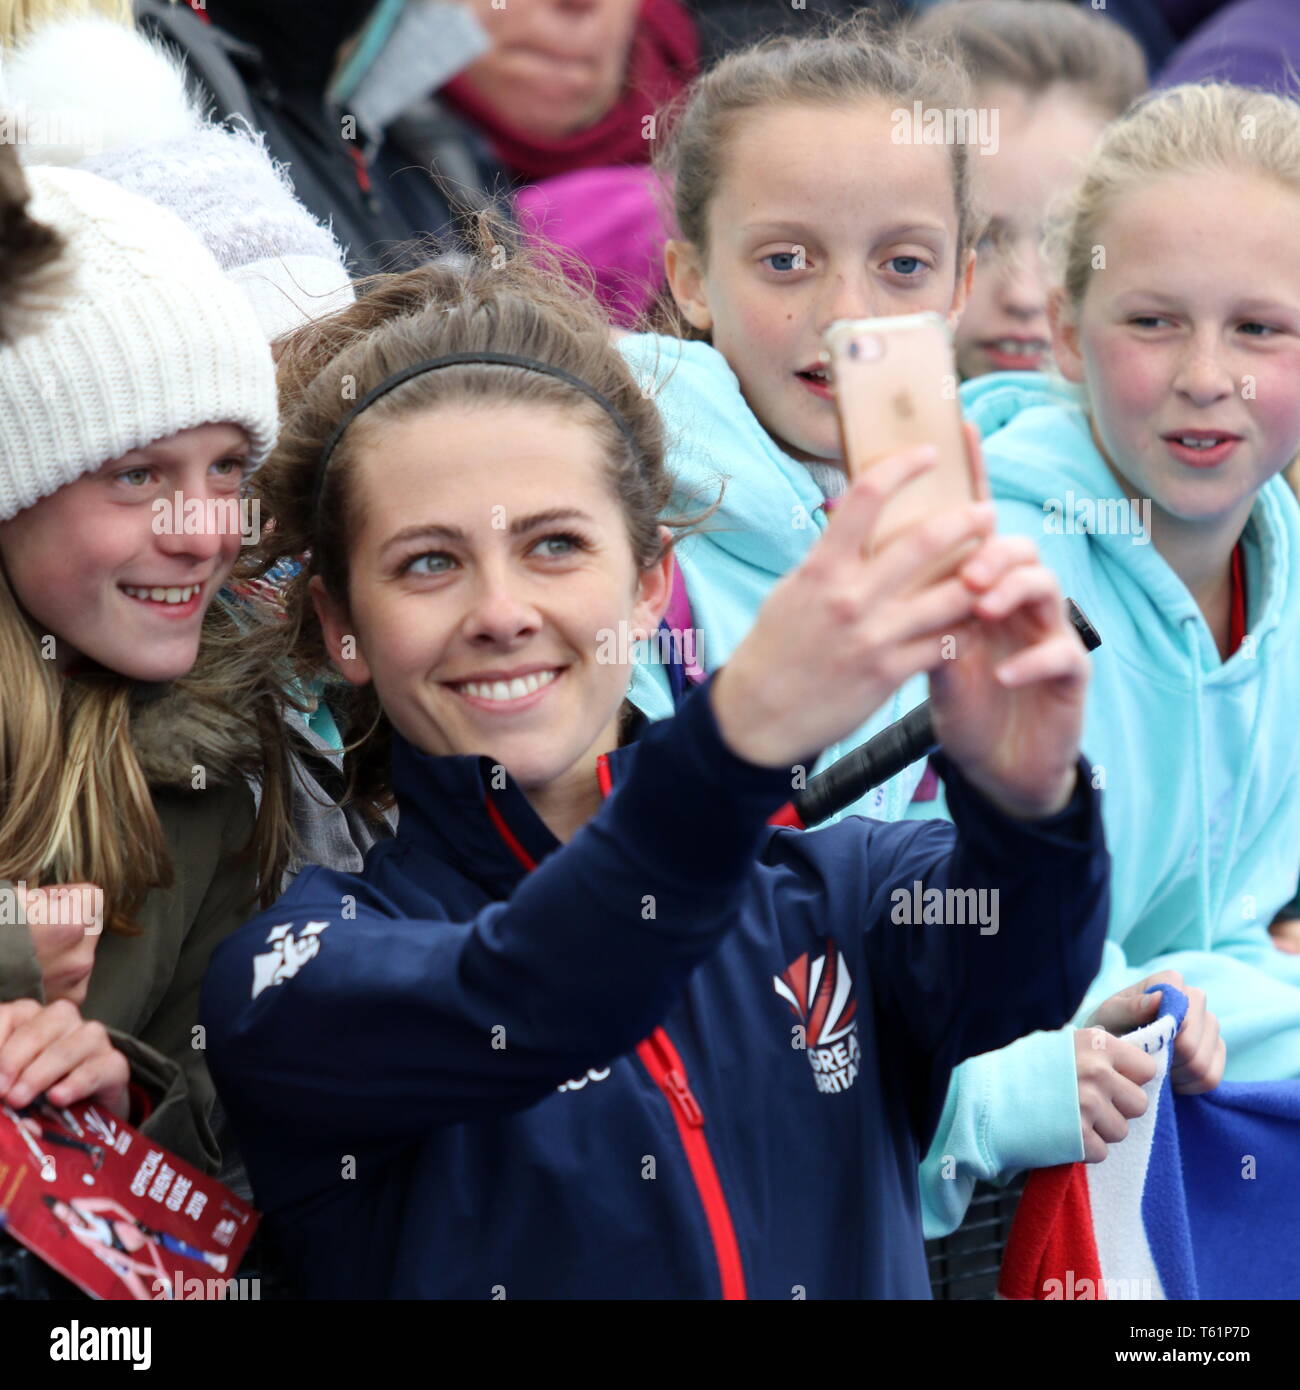 Anna Toman taking a selfie with fans after the 2019 FIH Pro League Great Britain v United States women’s hockey match at Queens Elizabeth Olympic Park Stock Photo